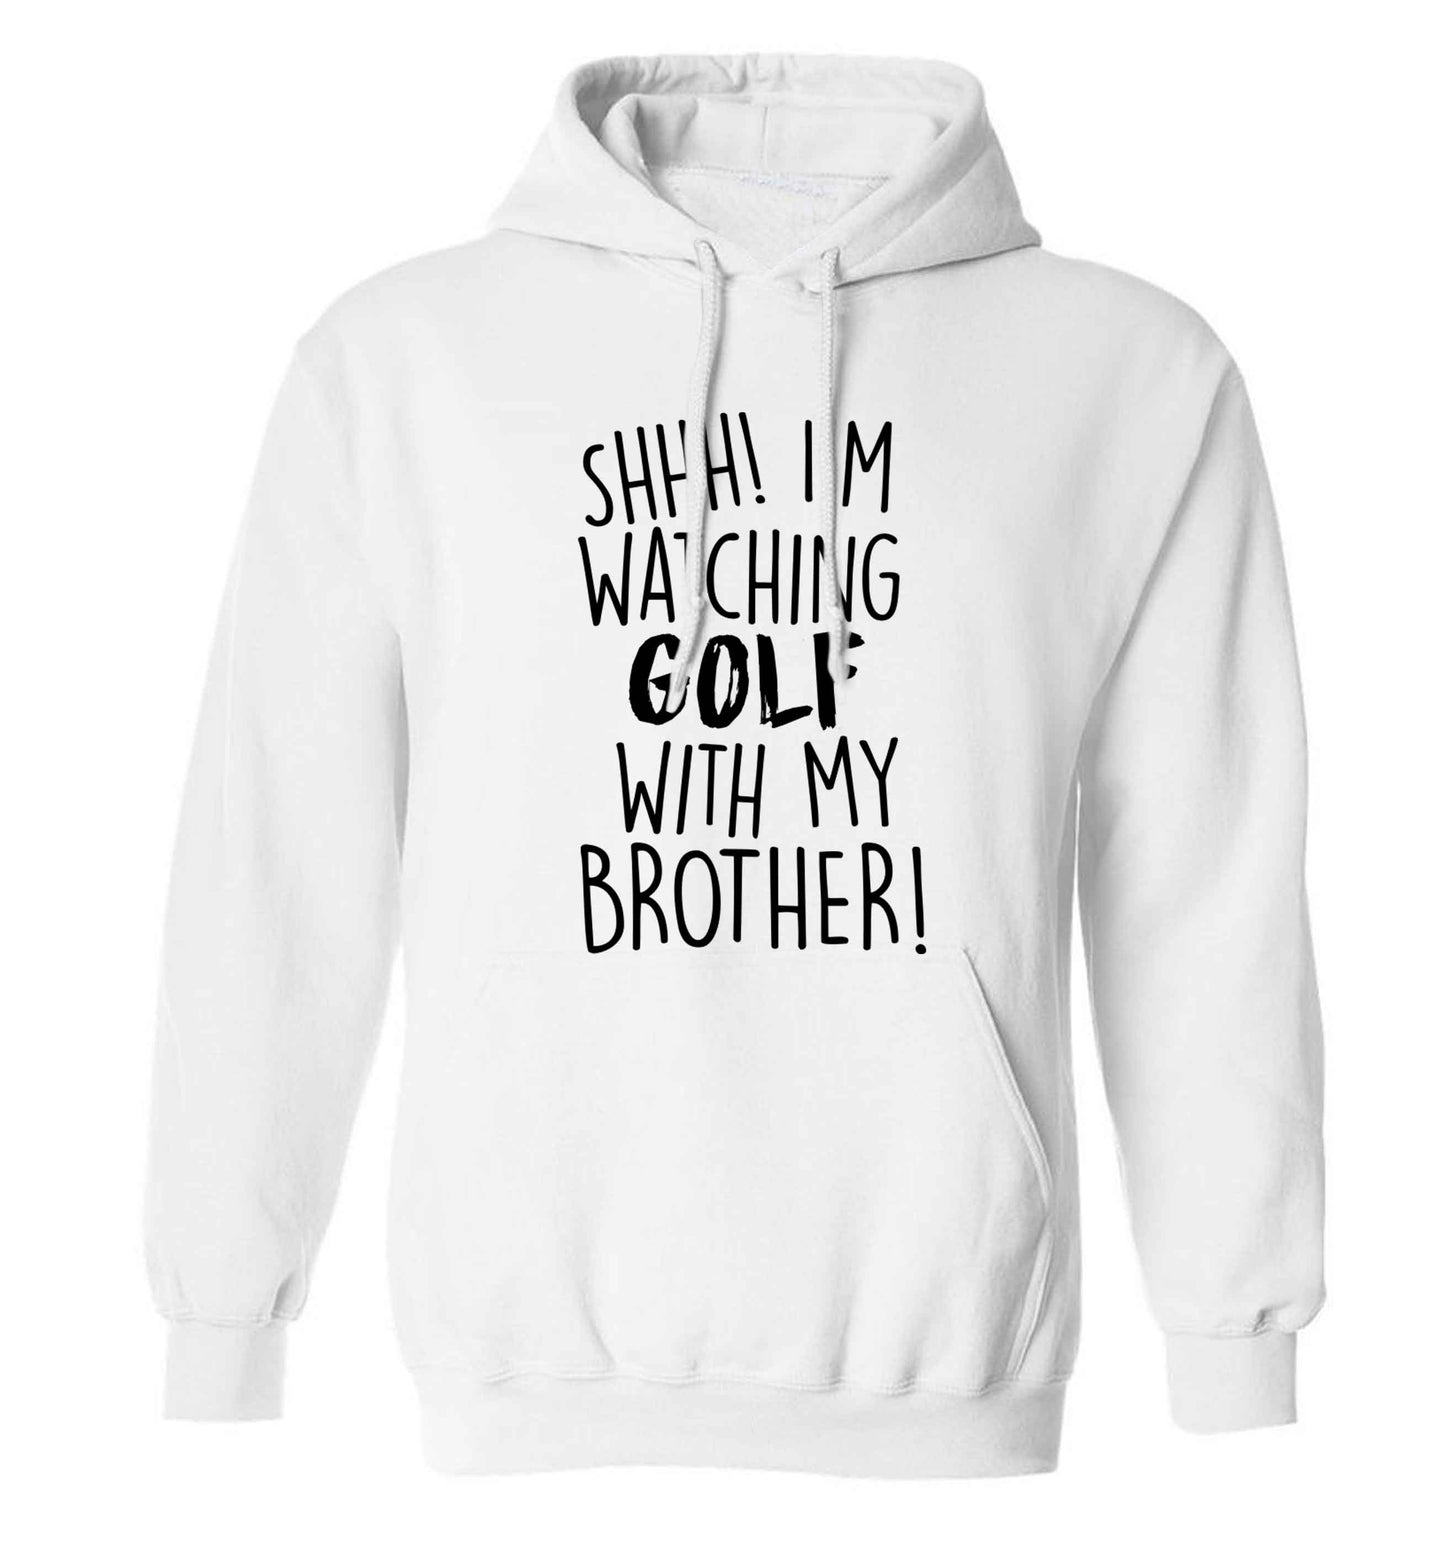 Shh I'm watching golf with my brother adults unisex white hoodie 2XL